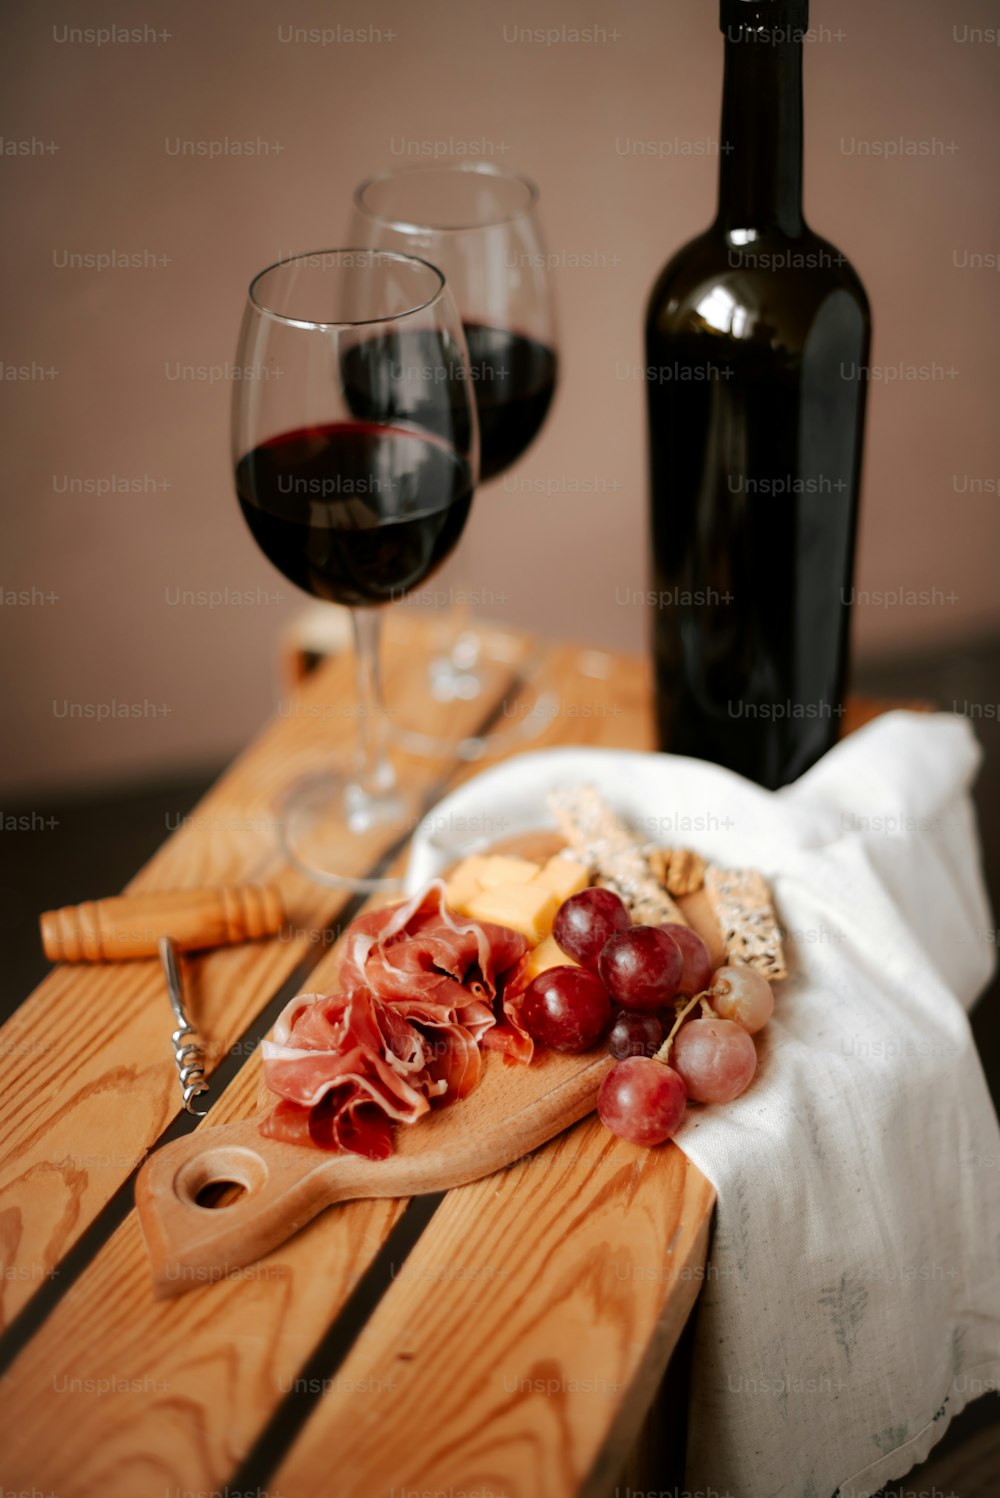 a wooden table topped with a bottle of wine and a plate of food